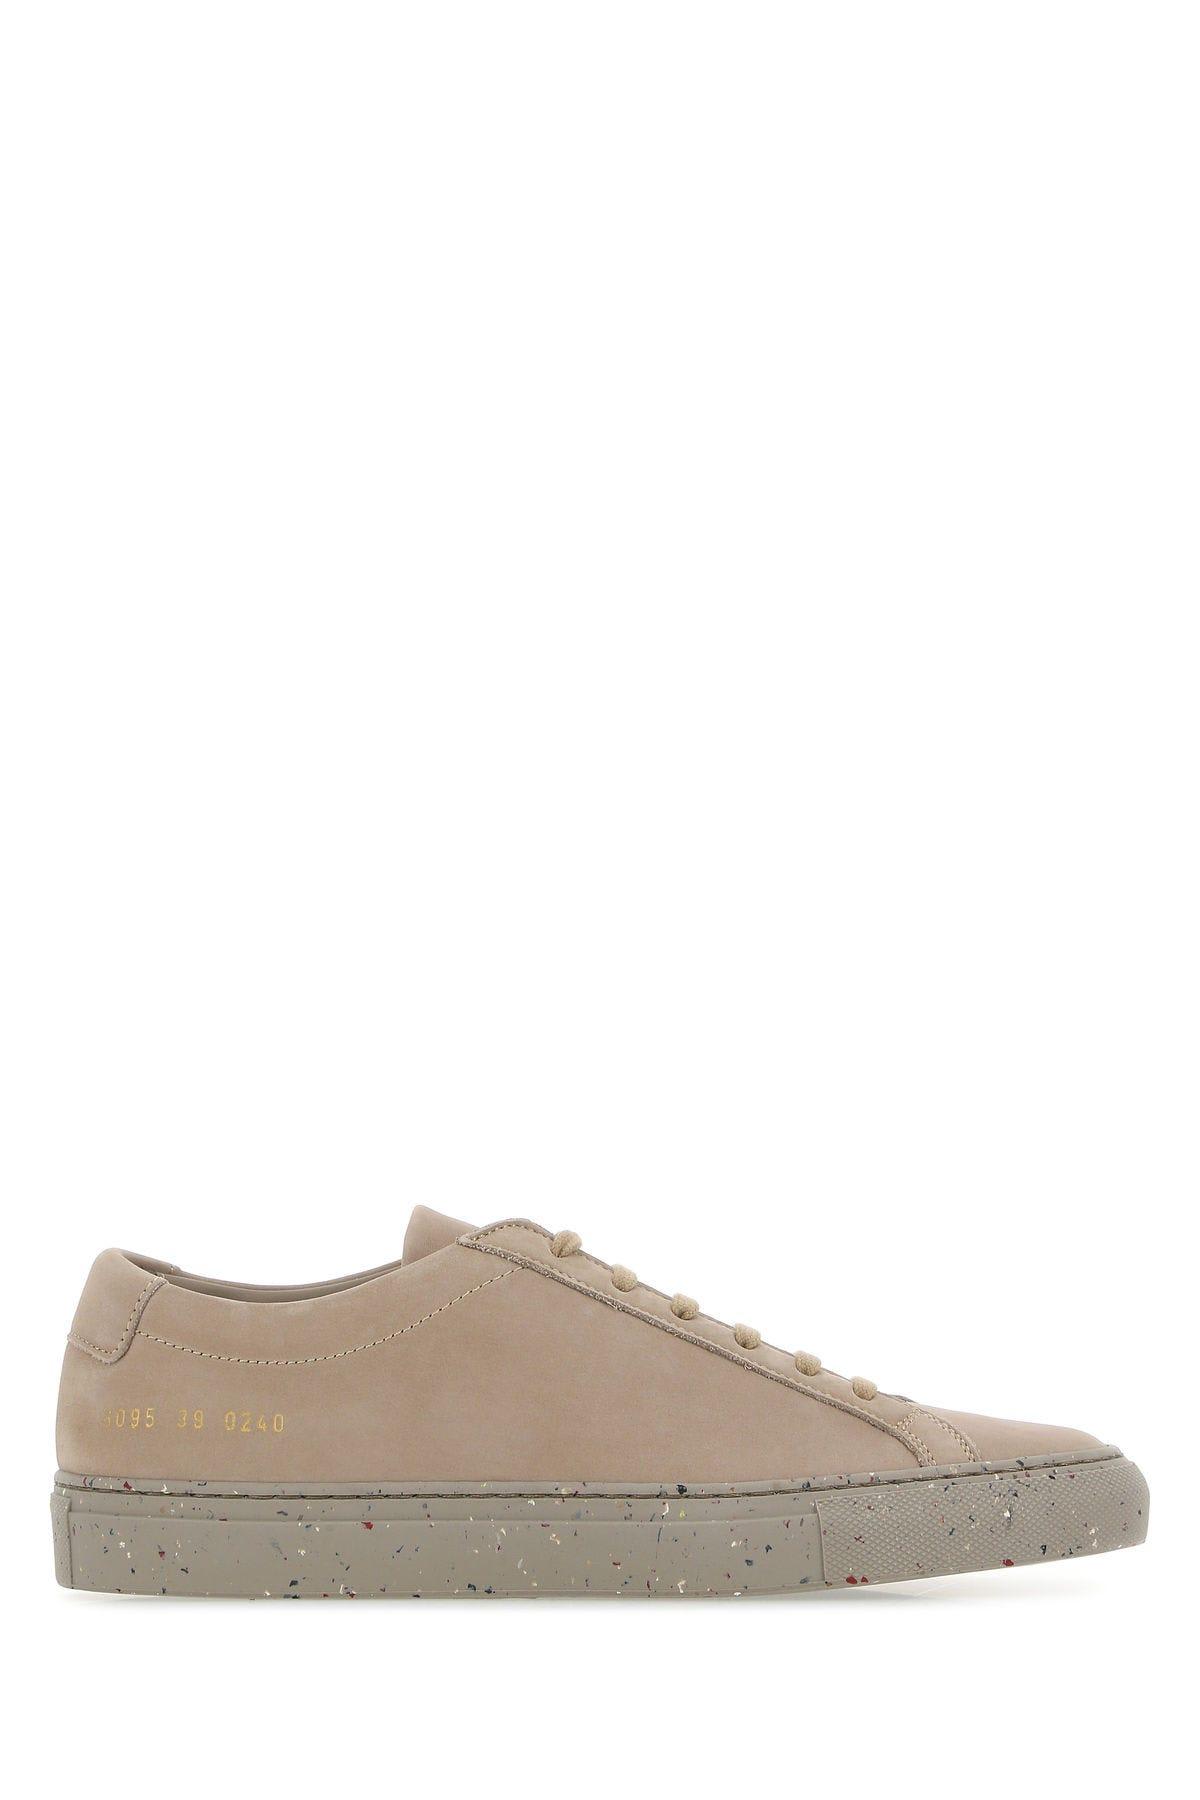 Common Projects Biscuit Nubuck Achilles Sneakers